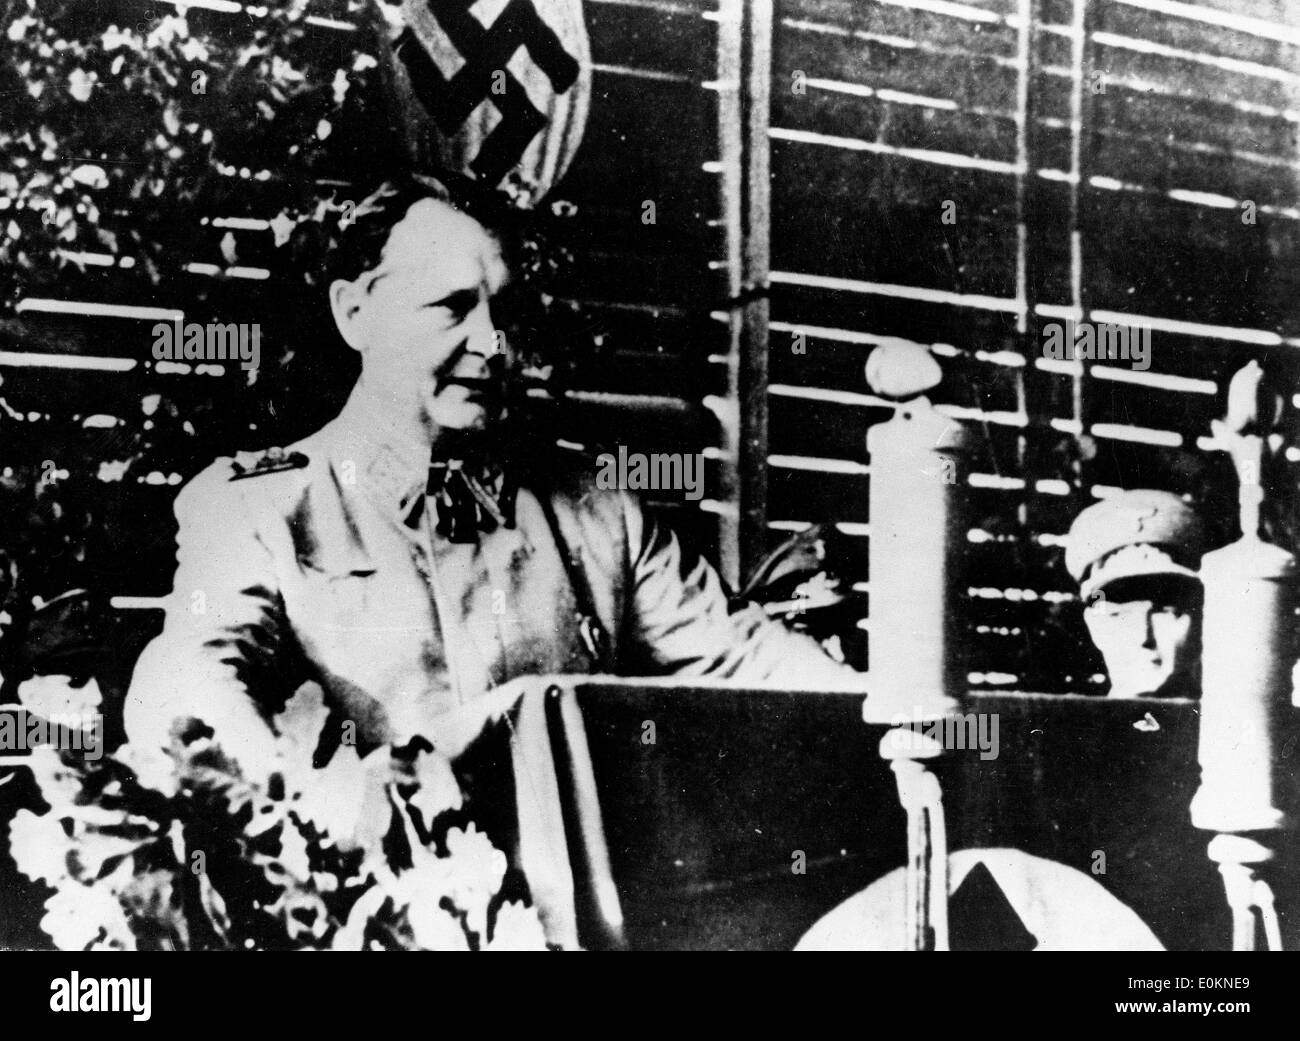 Jan. 01, 1930 - Munich, Germany - File Photo: circa 1930s-1940s. HERMANN GOERING, Chairman of the Council for the defense of the Reich, addressing workers of an armament plant while on an inspection tour of German fighter plane airdroms 'Stressed the unshakeable conviction of a German victory', according to the caption accompanying this German photo supplied by Pressen's Bild, Swedish Picture Agency. Stock Photo